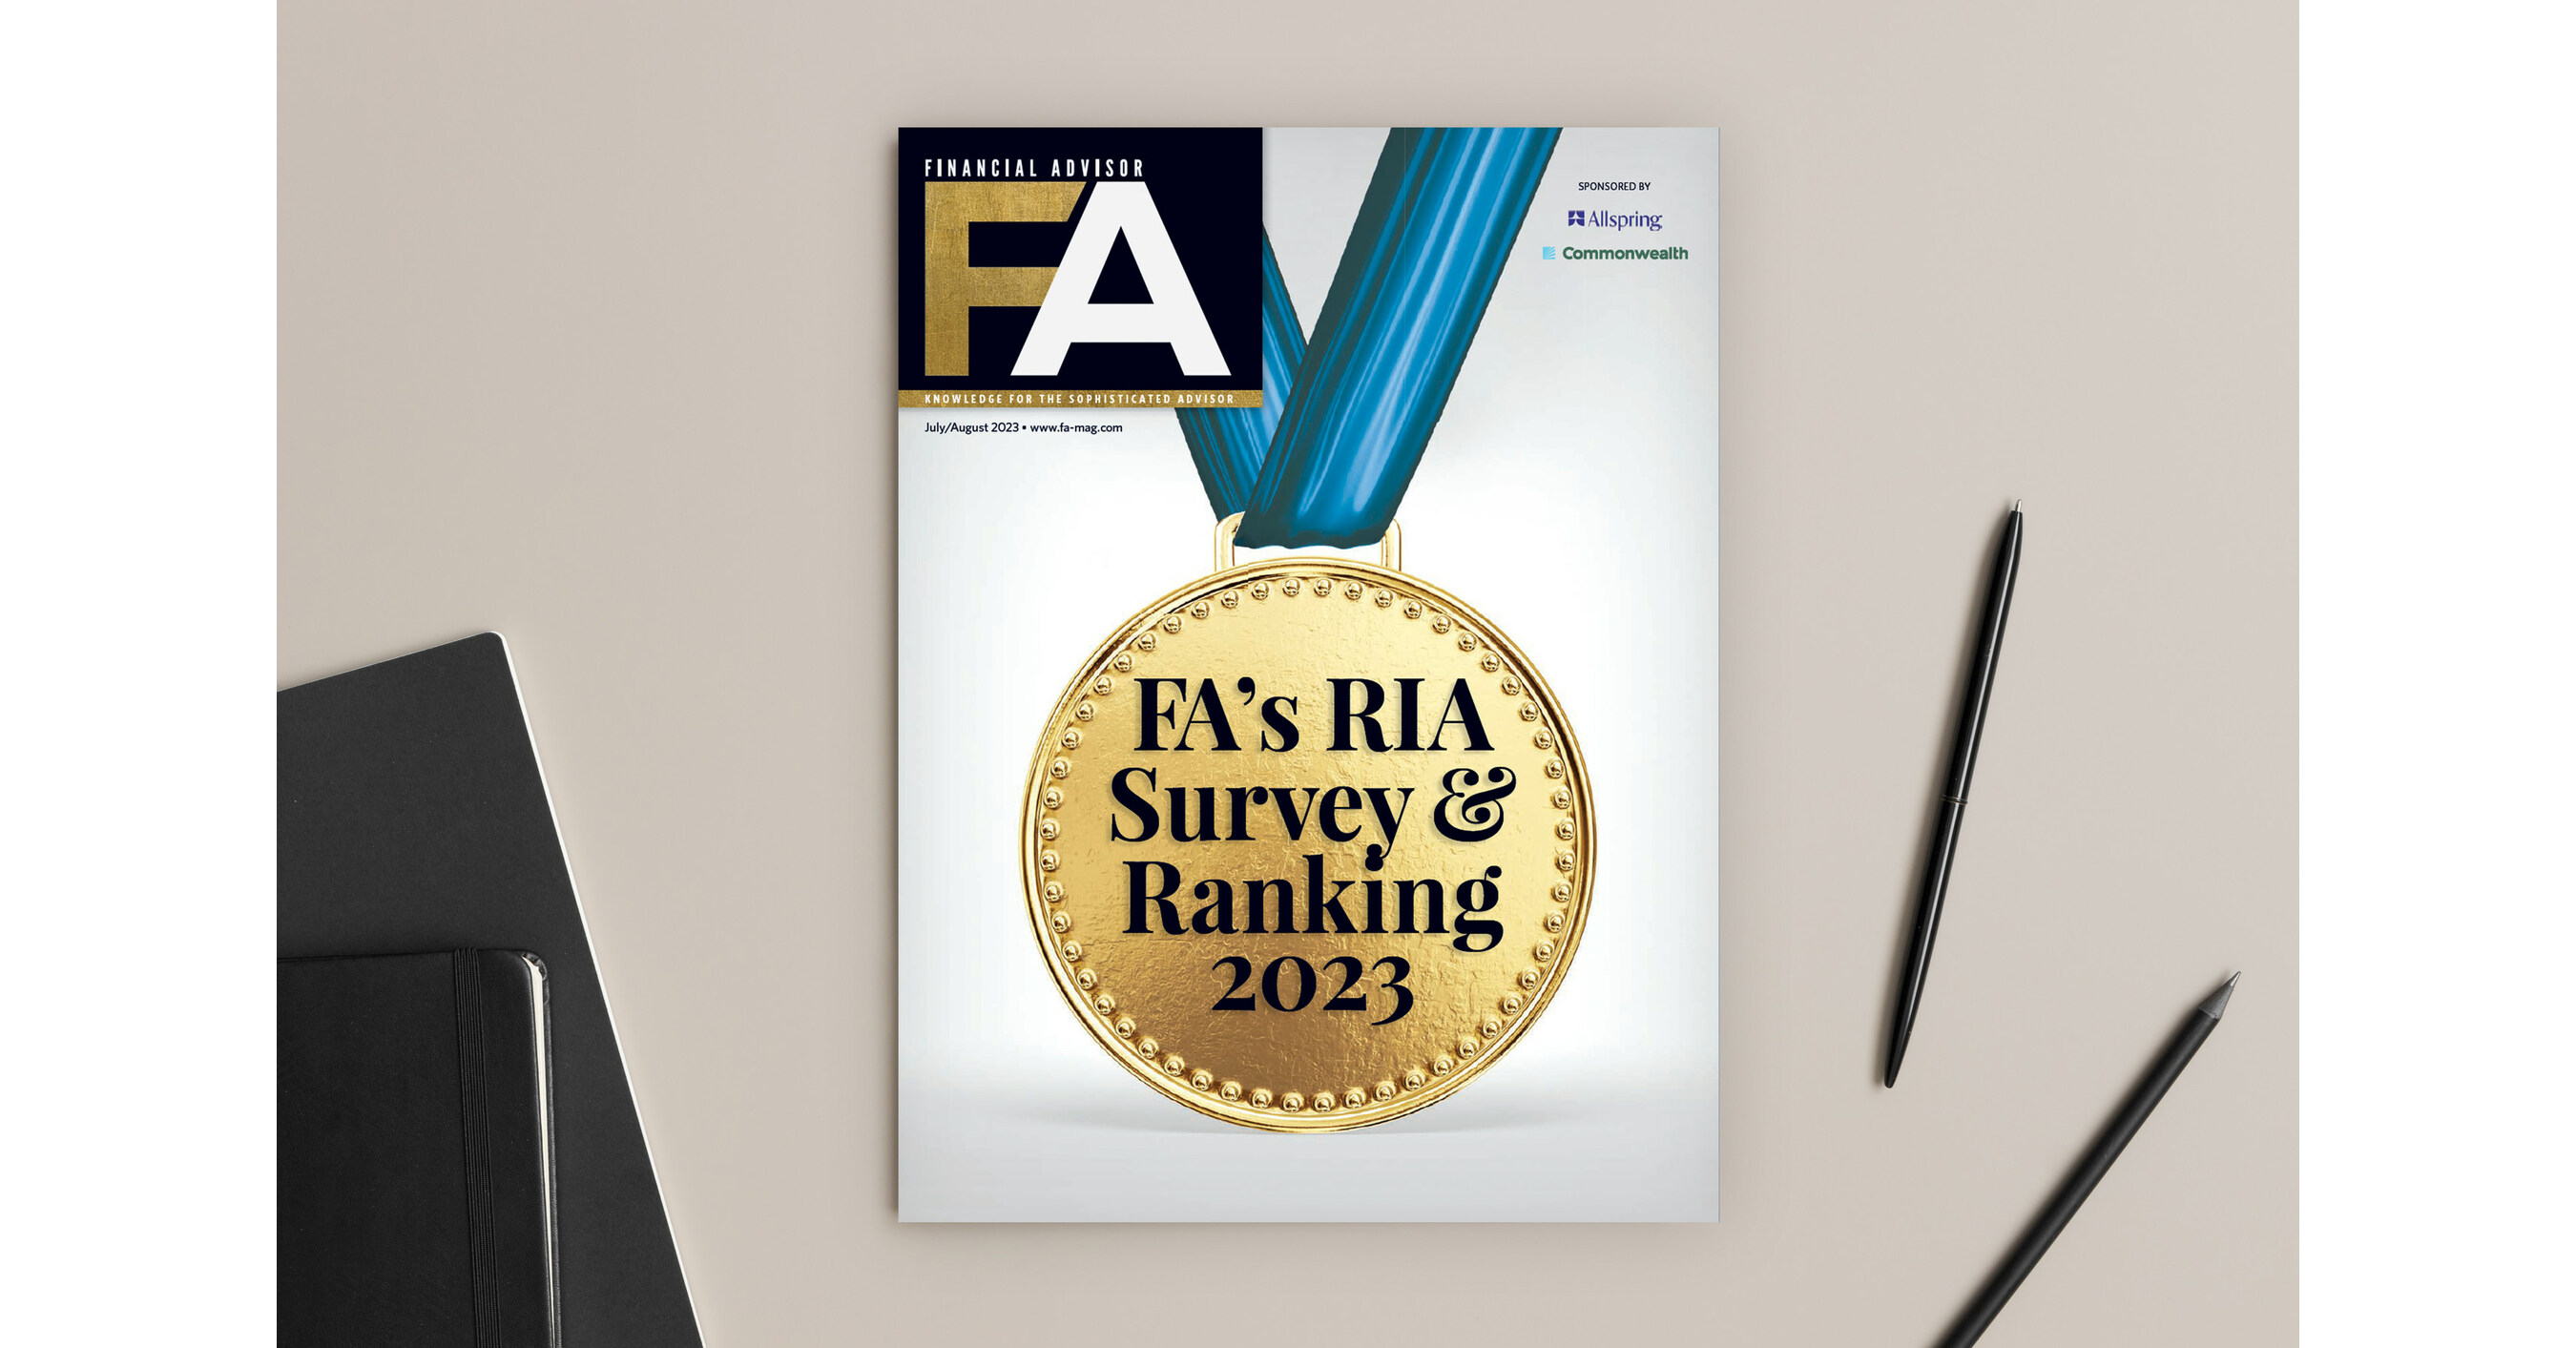 Inspire Investing Ranked one of America's Top RIAs for 2023 by